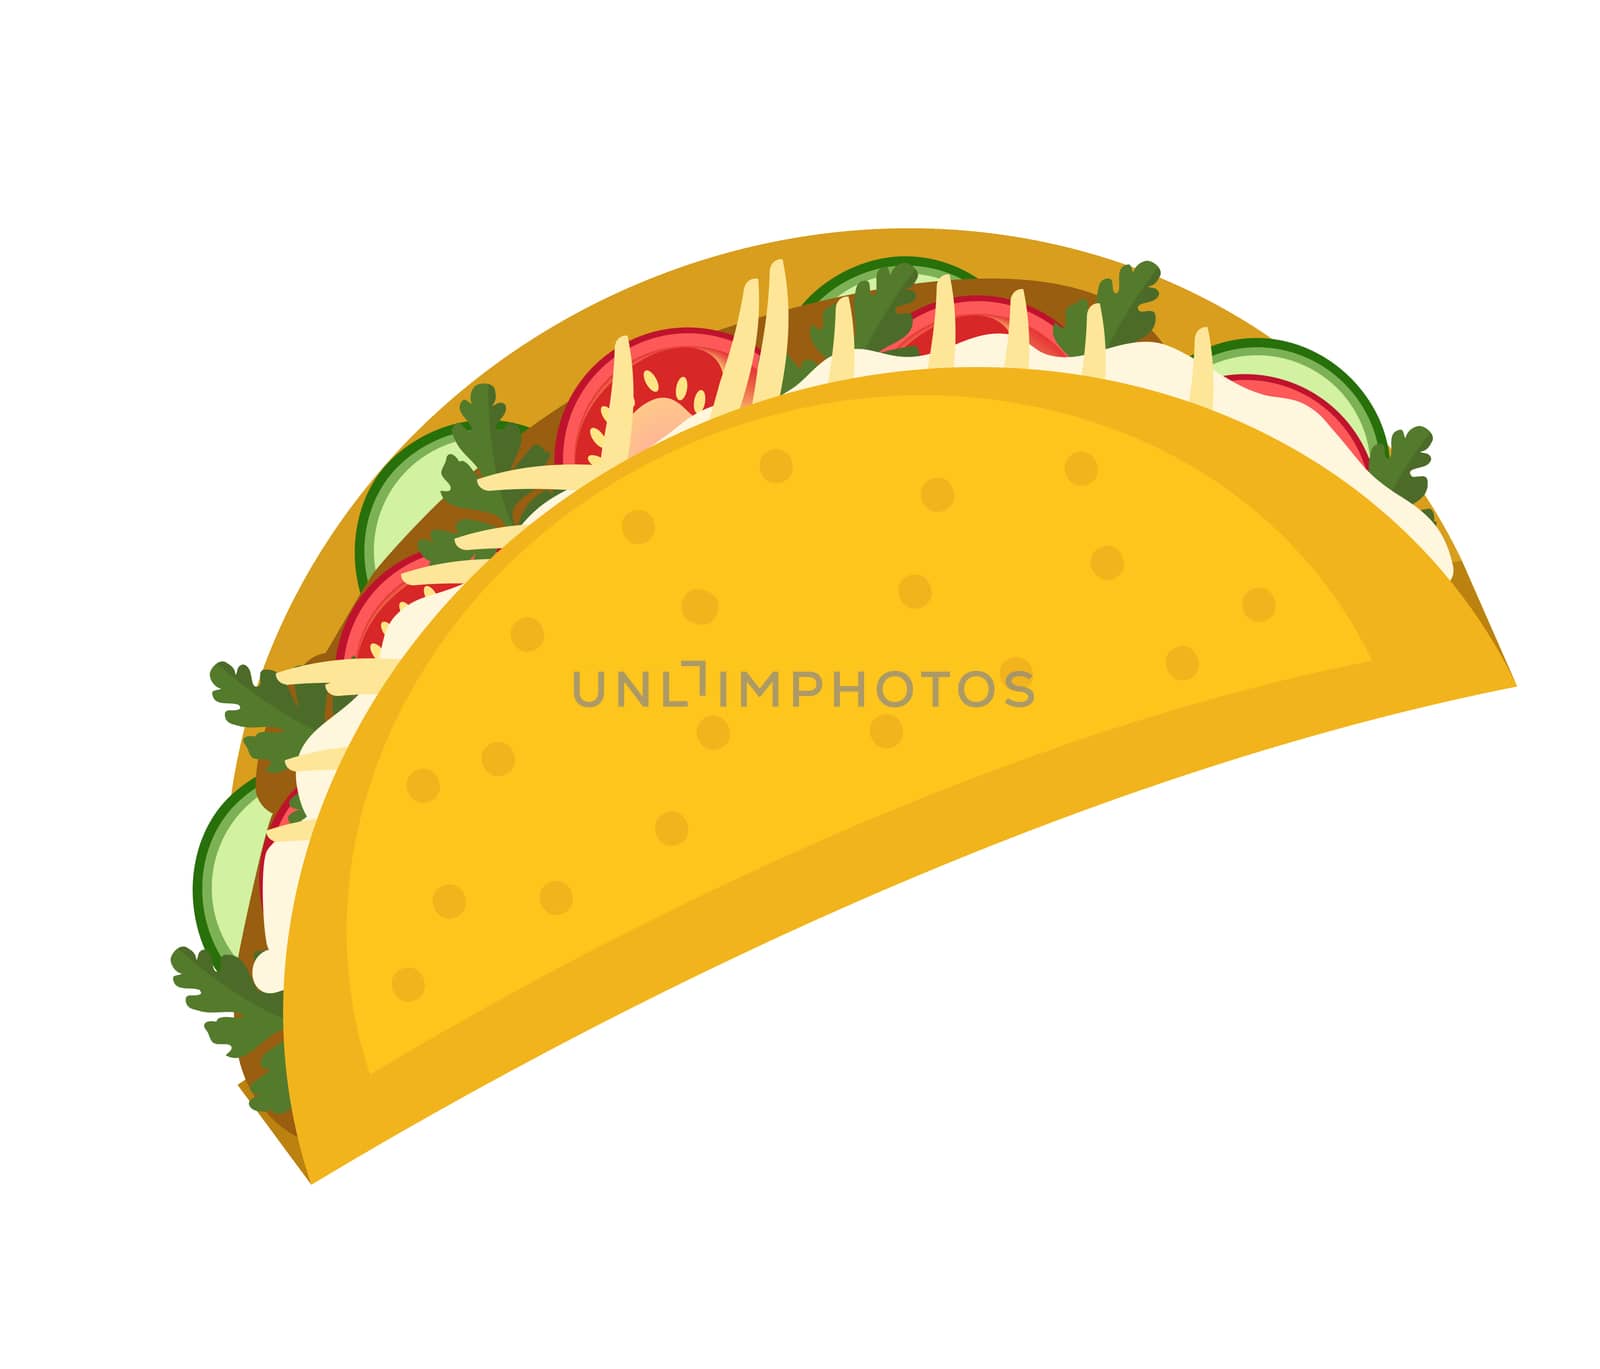 Tacos icon flat, cartoon style isolated on white background. illustration, clip art. Traditional Mexican food